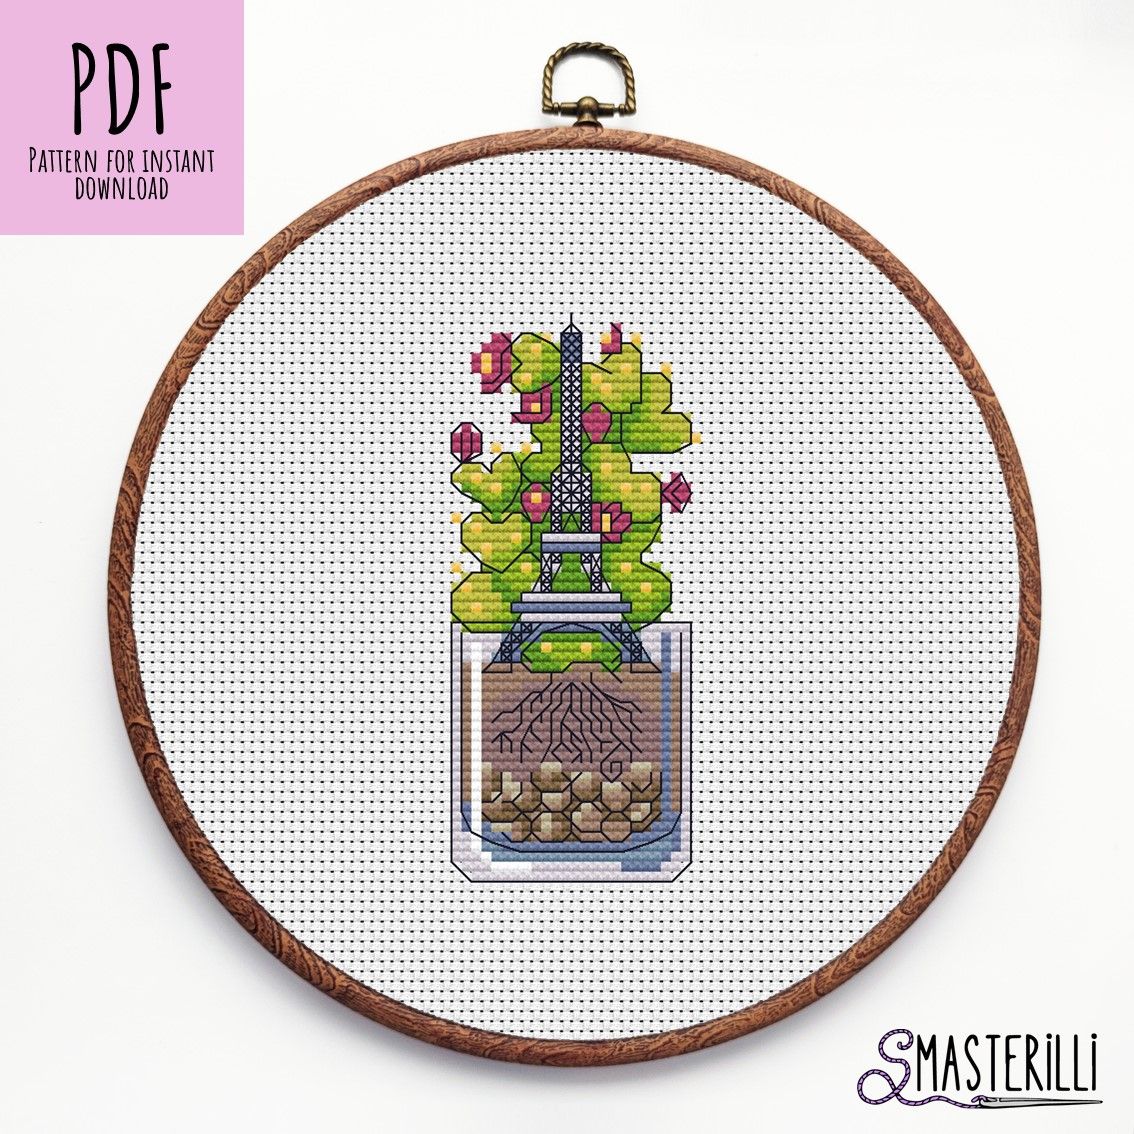 Potted cacti cross stitch pattern with Eiffel tower in the glass. Cute and easy embroidery ornament for beginners by Smasterilli